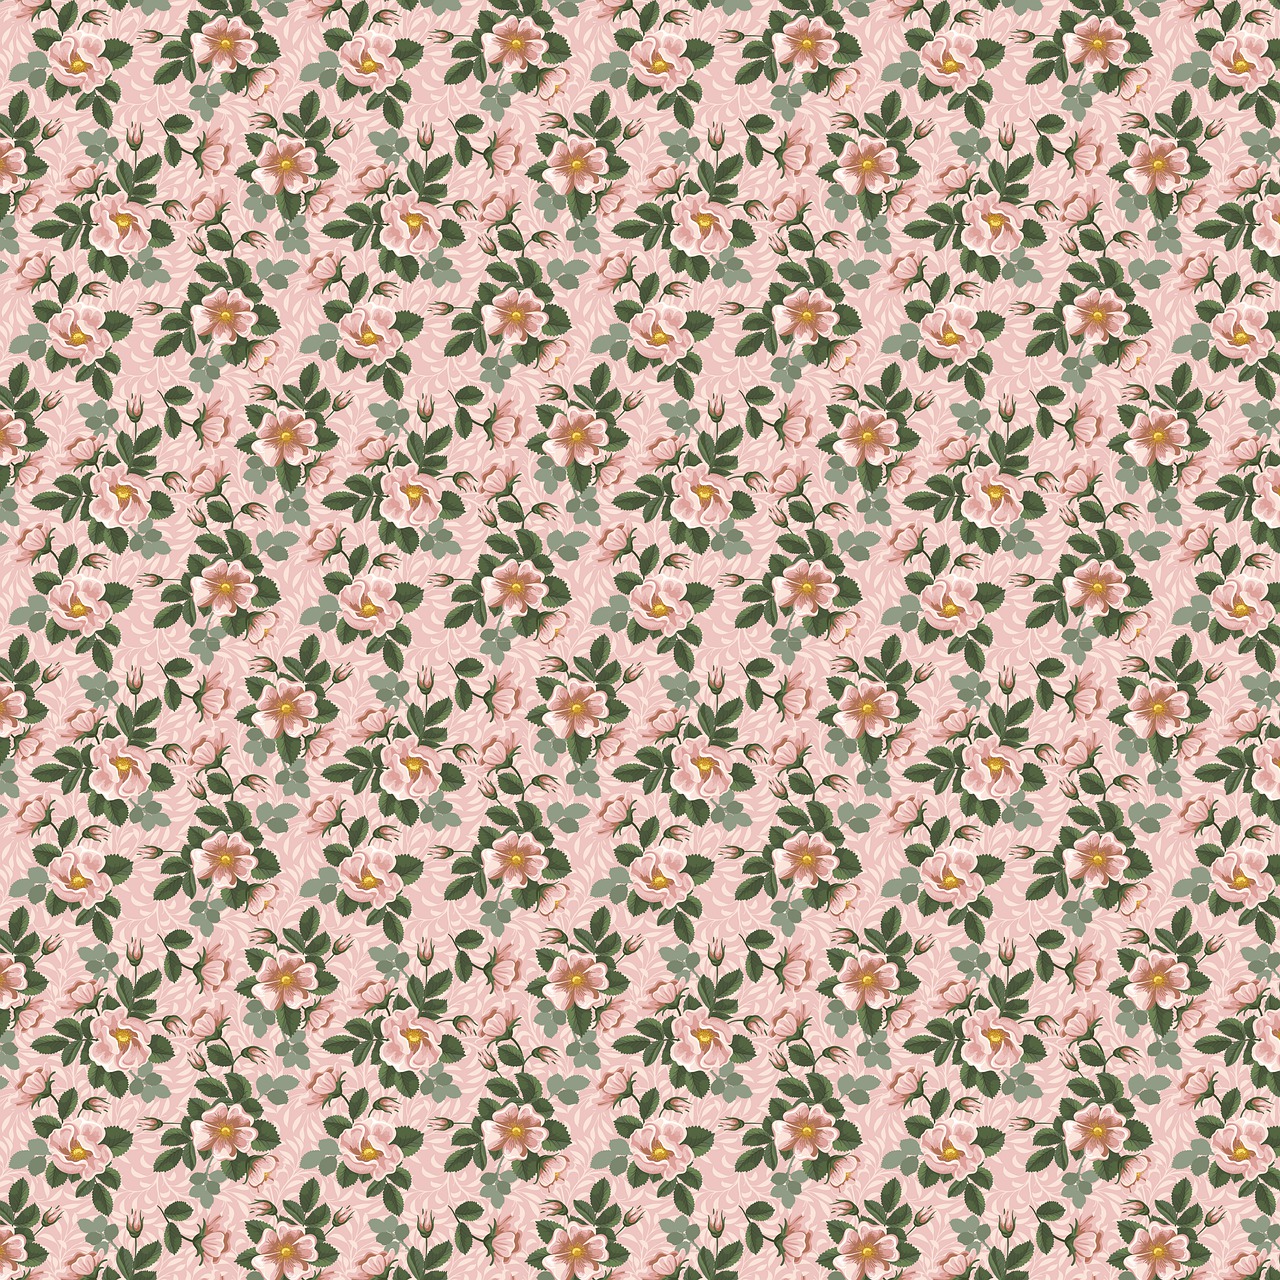 a floral wallpaper with pink flowers and green leaves, inspired by Miyagawa Chōshun, pink rosa, corduroy, slightly pixelated, victoriana